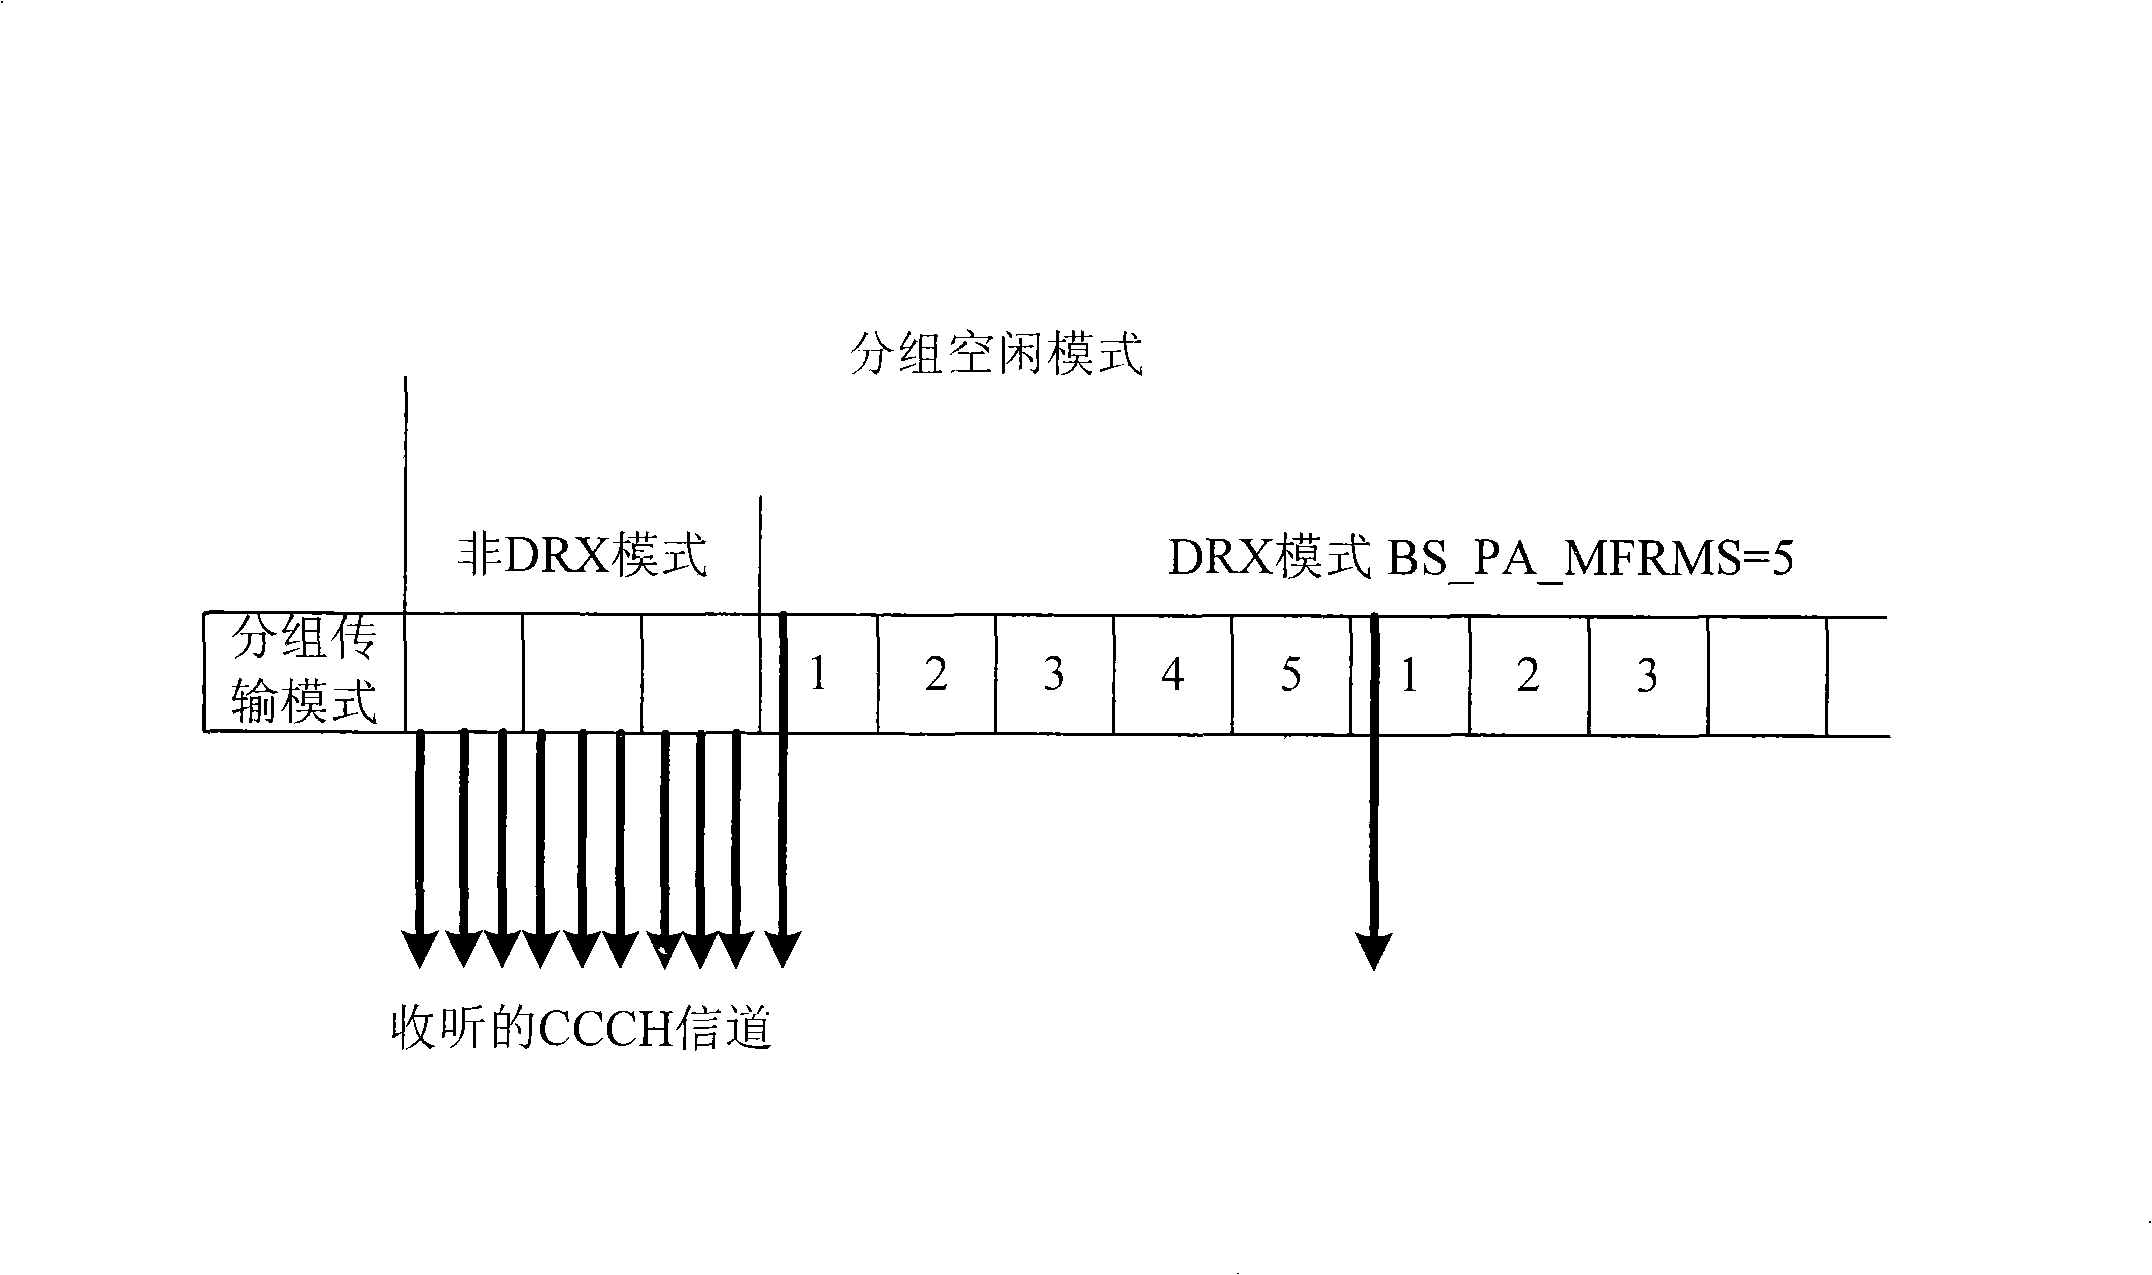 Method for improving wireless data service access speed